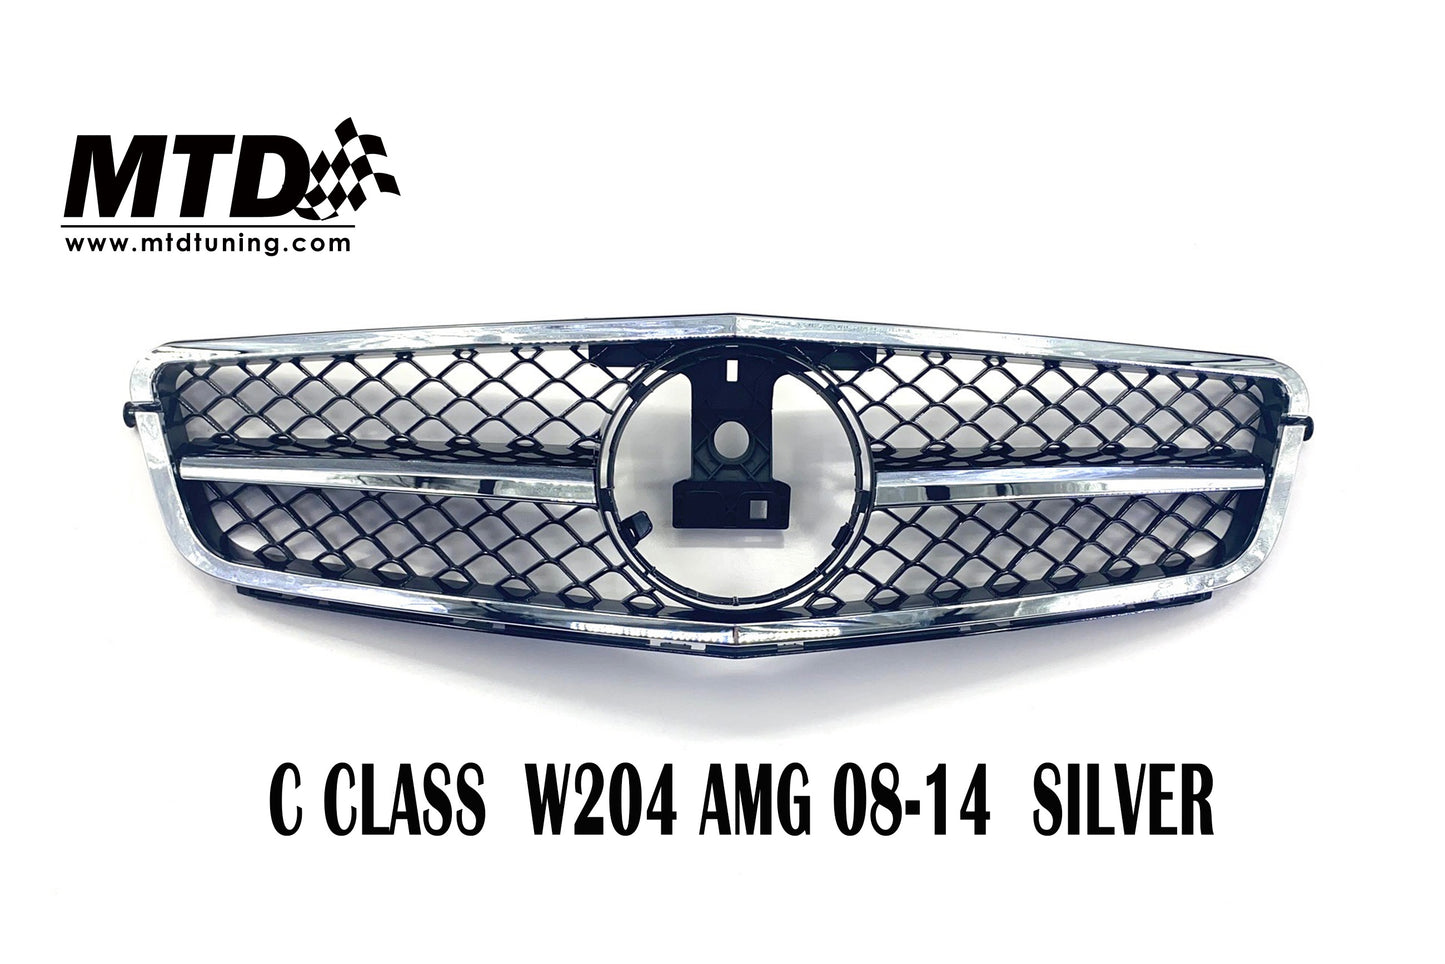 Mercedes-Benz C Class W204 Front Grille AMG 08-14 Silver